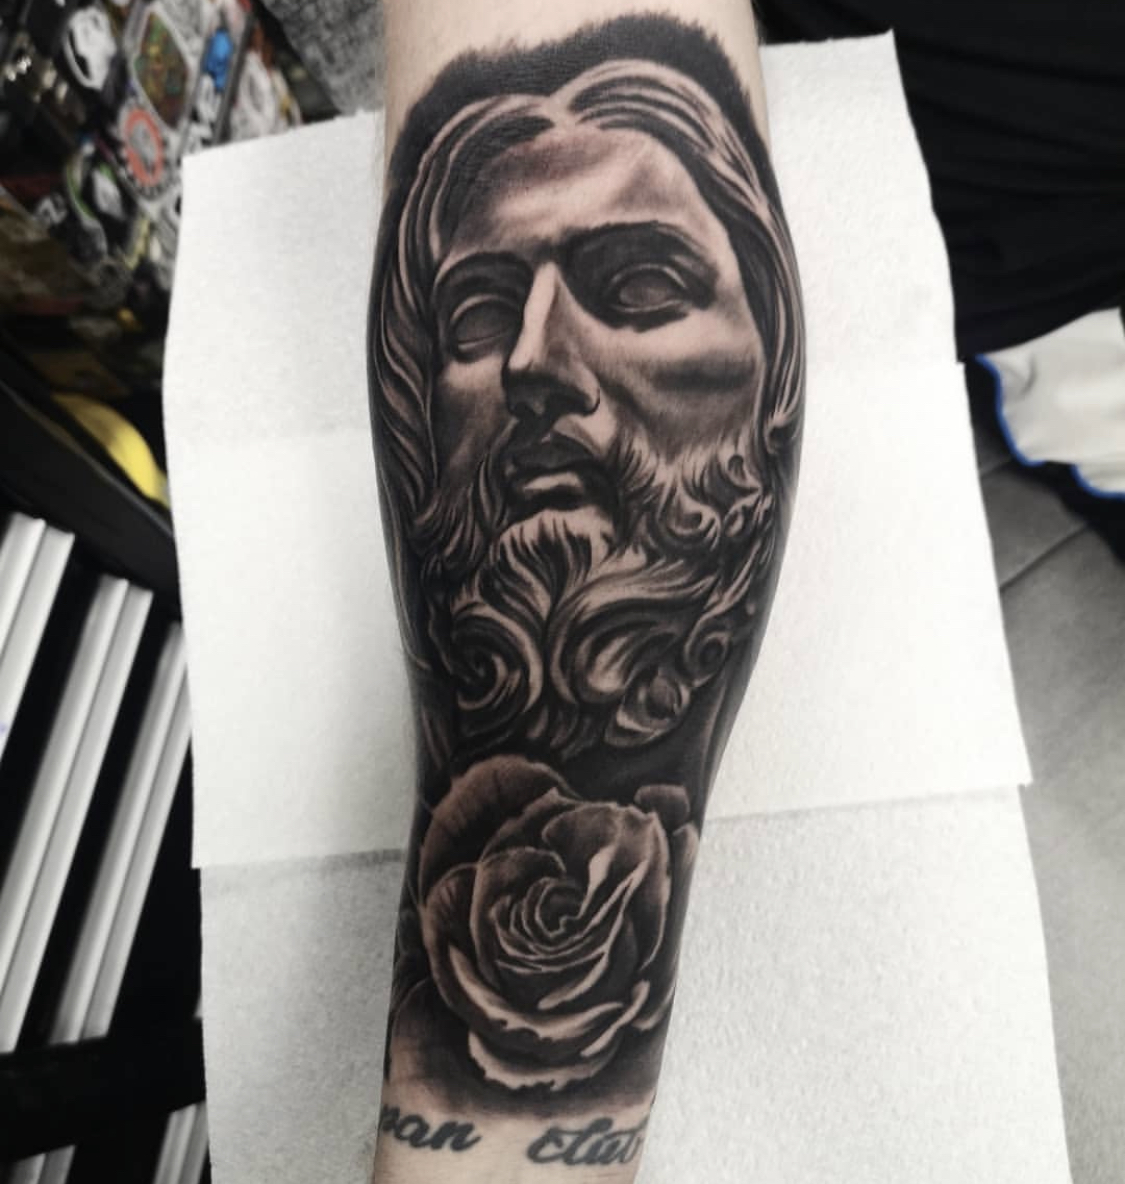 DISCOVER TATTOO ARTISTS IN ONTARIO